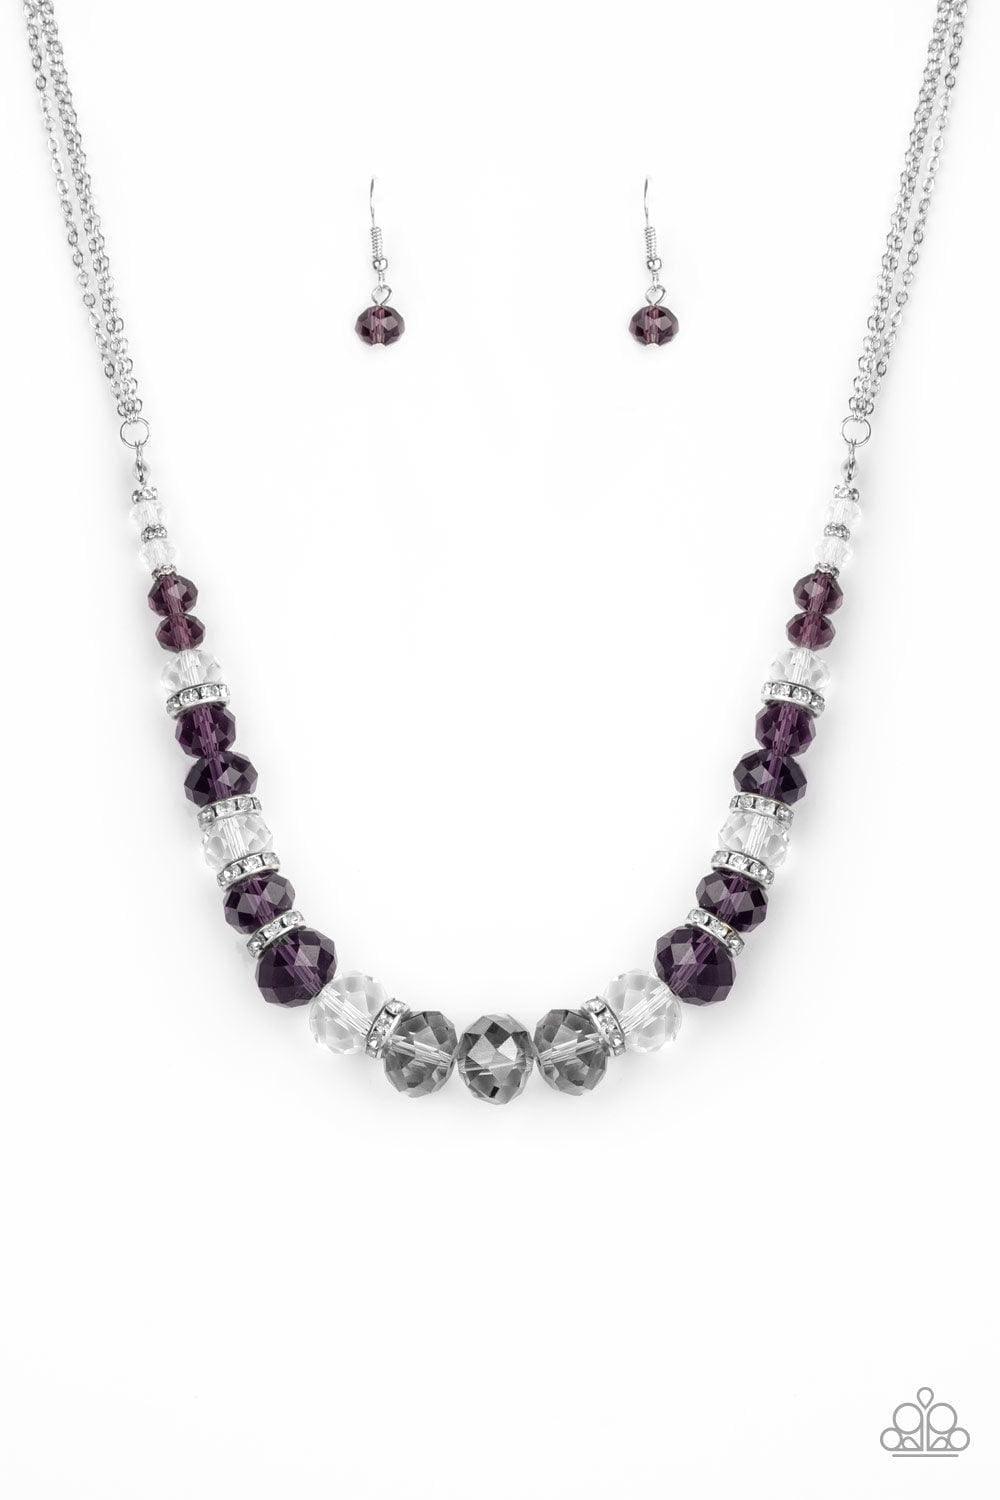 Paparazzi Accessories - Distracted By Dazzle - Purple Necklace - Bling by JessieK